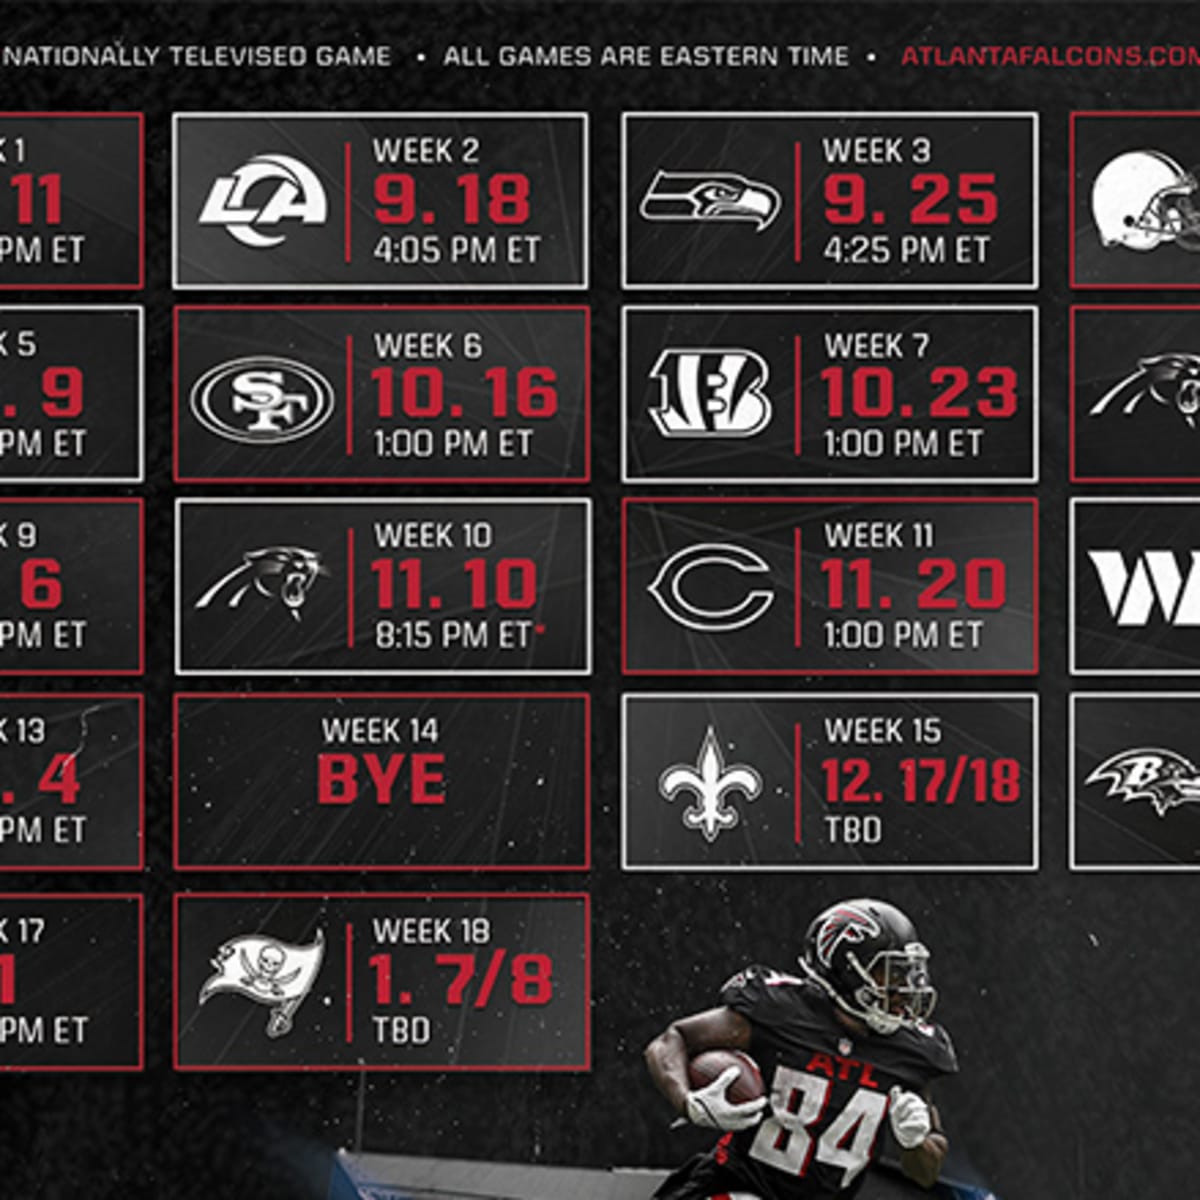 give me the atlanta falcons schedule